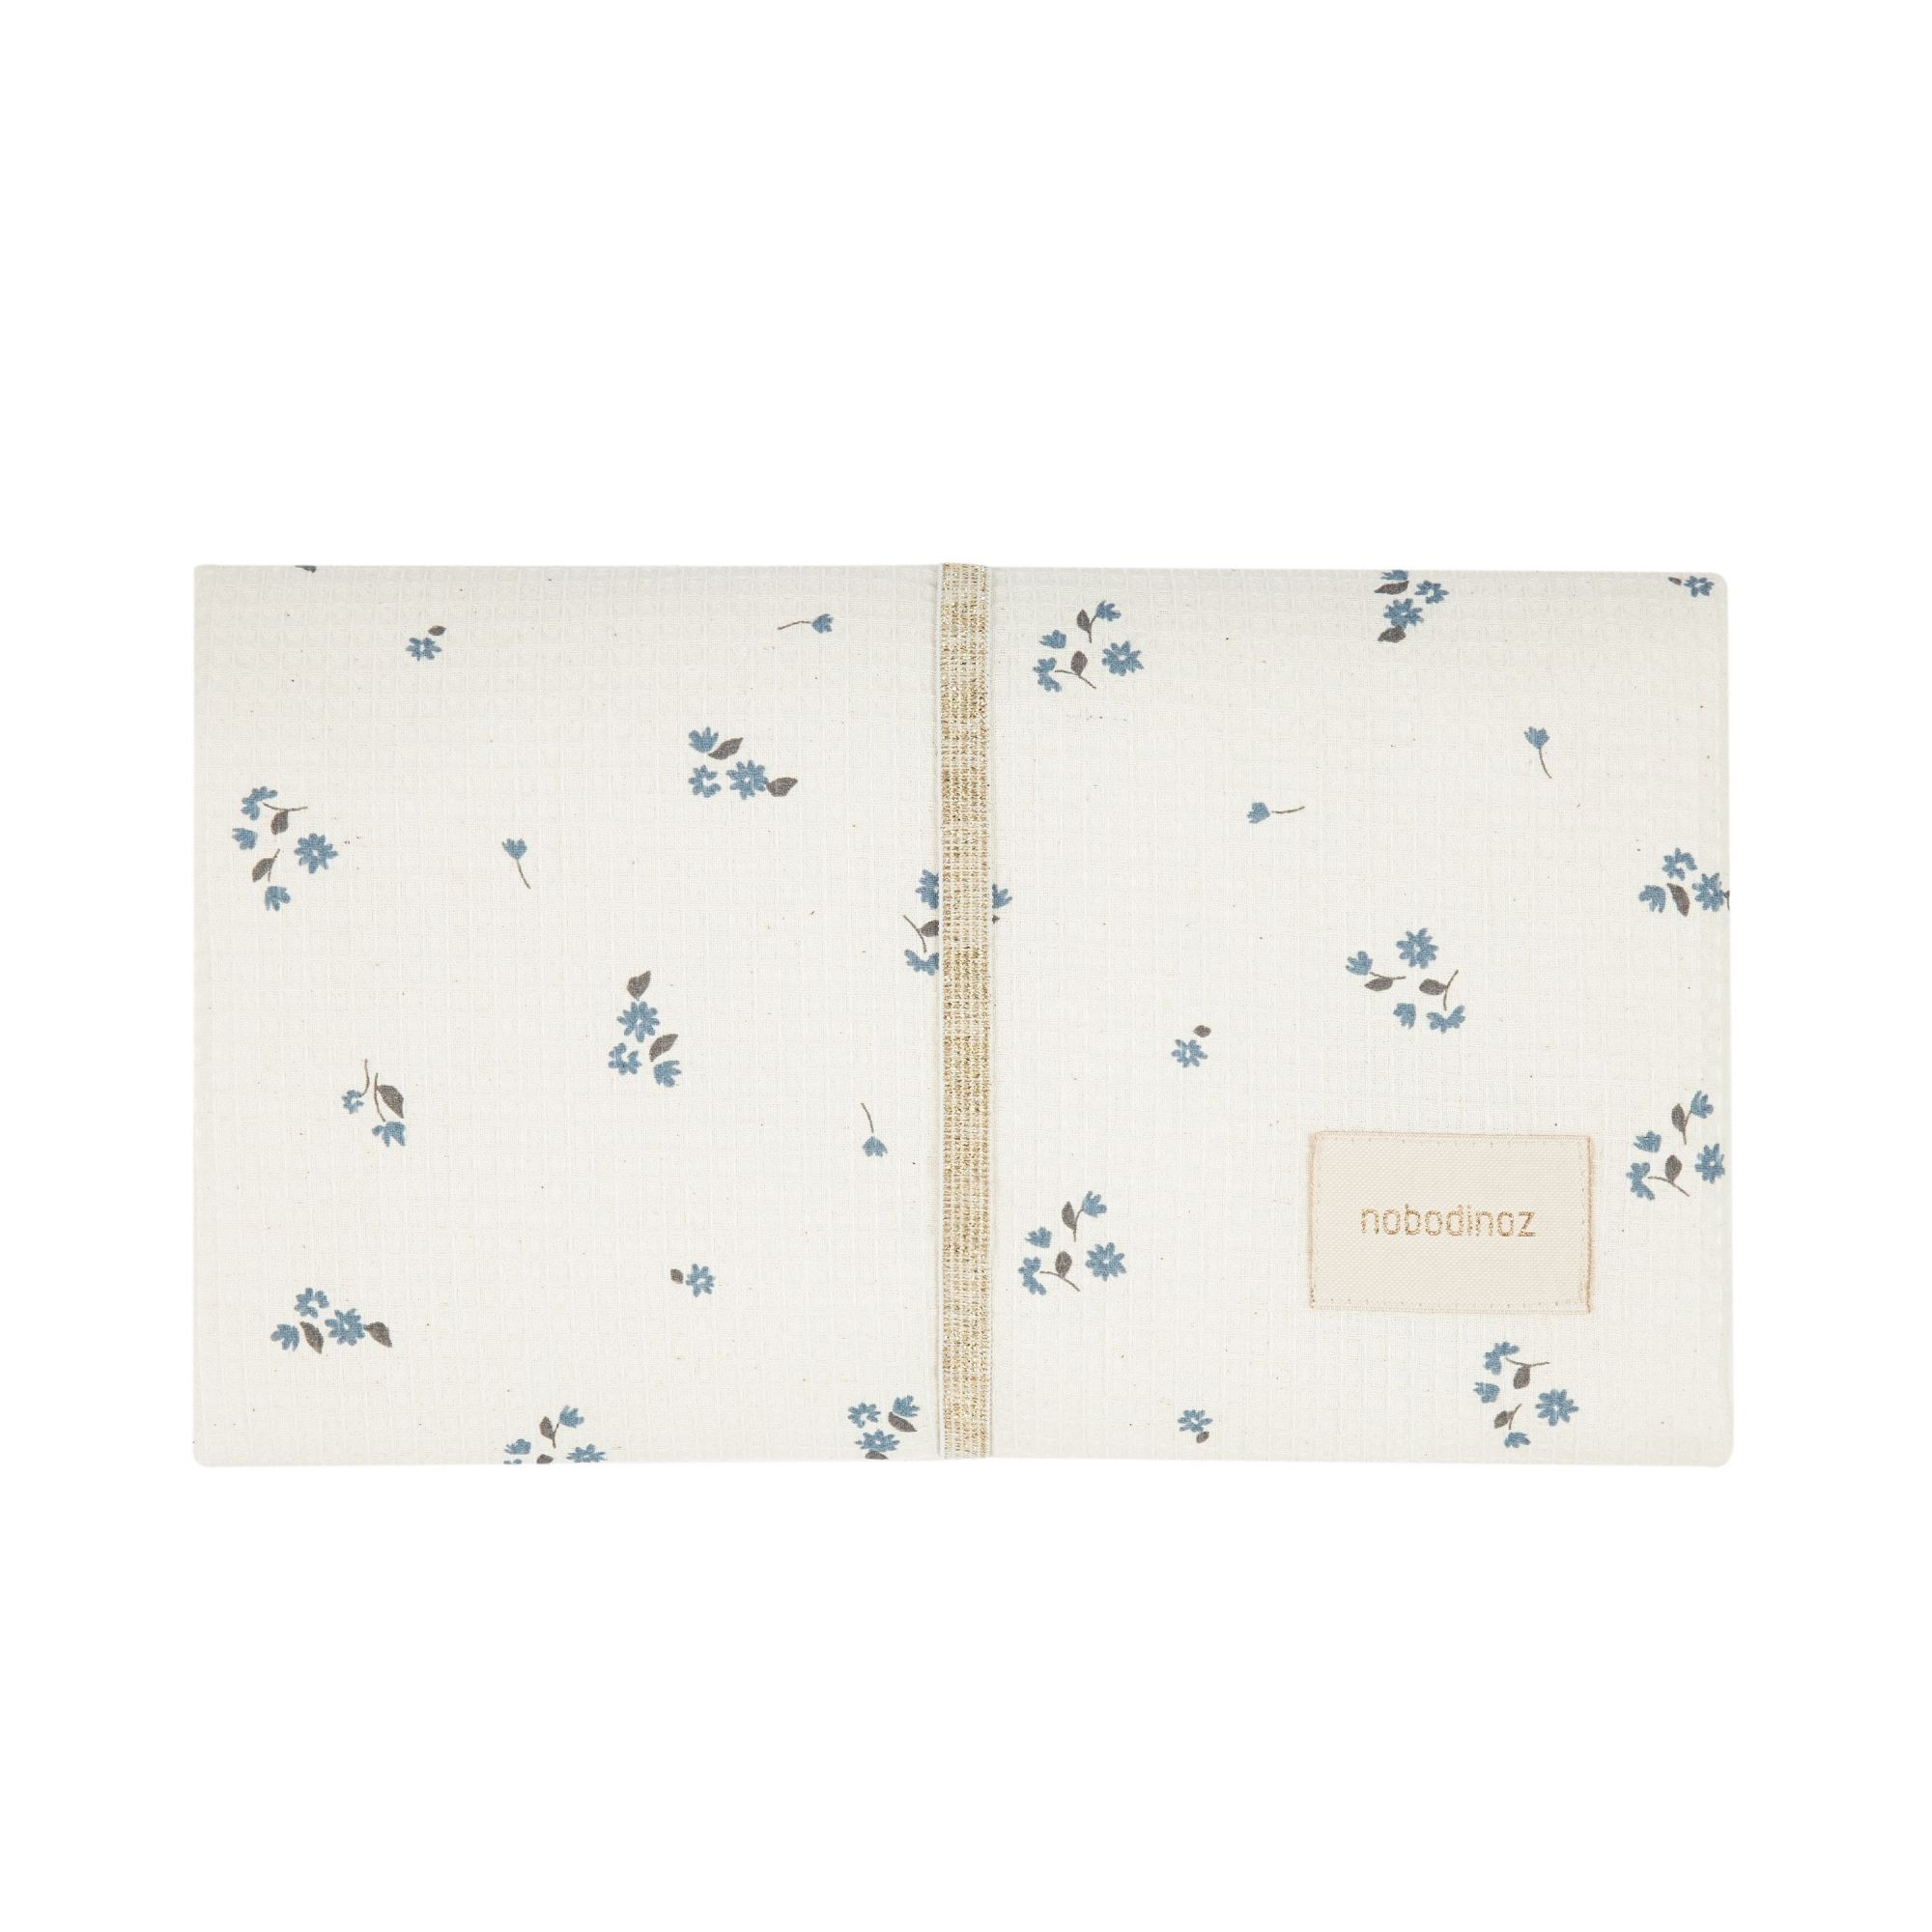 https://www.madeinbebe.com/boutique/uploads/articles/zoom/mozart-waterproof-changing-pad-68x50-lily-blue-nobodinoz_OA.jpg